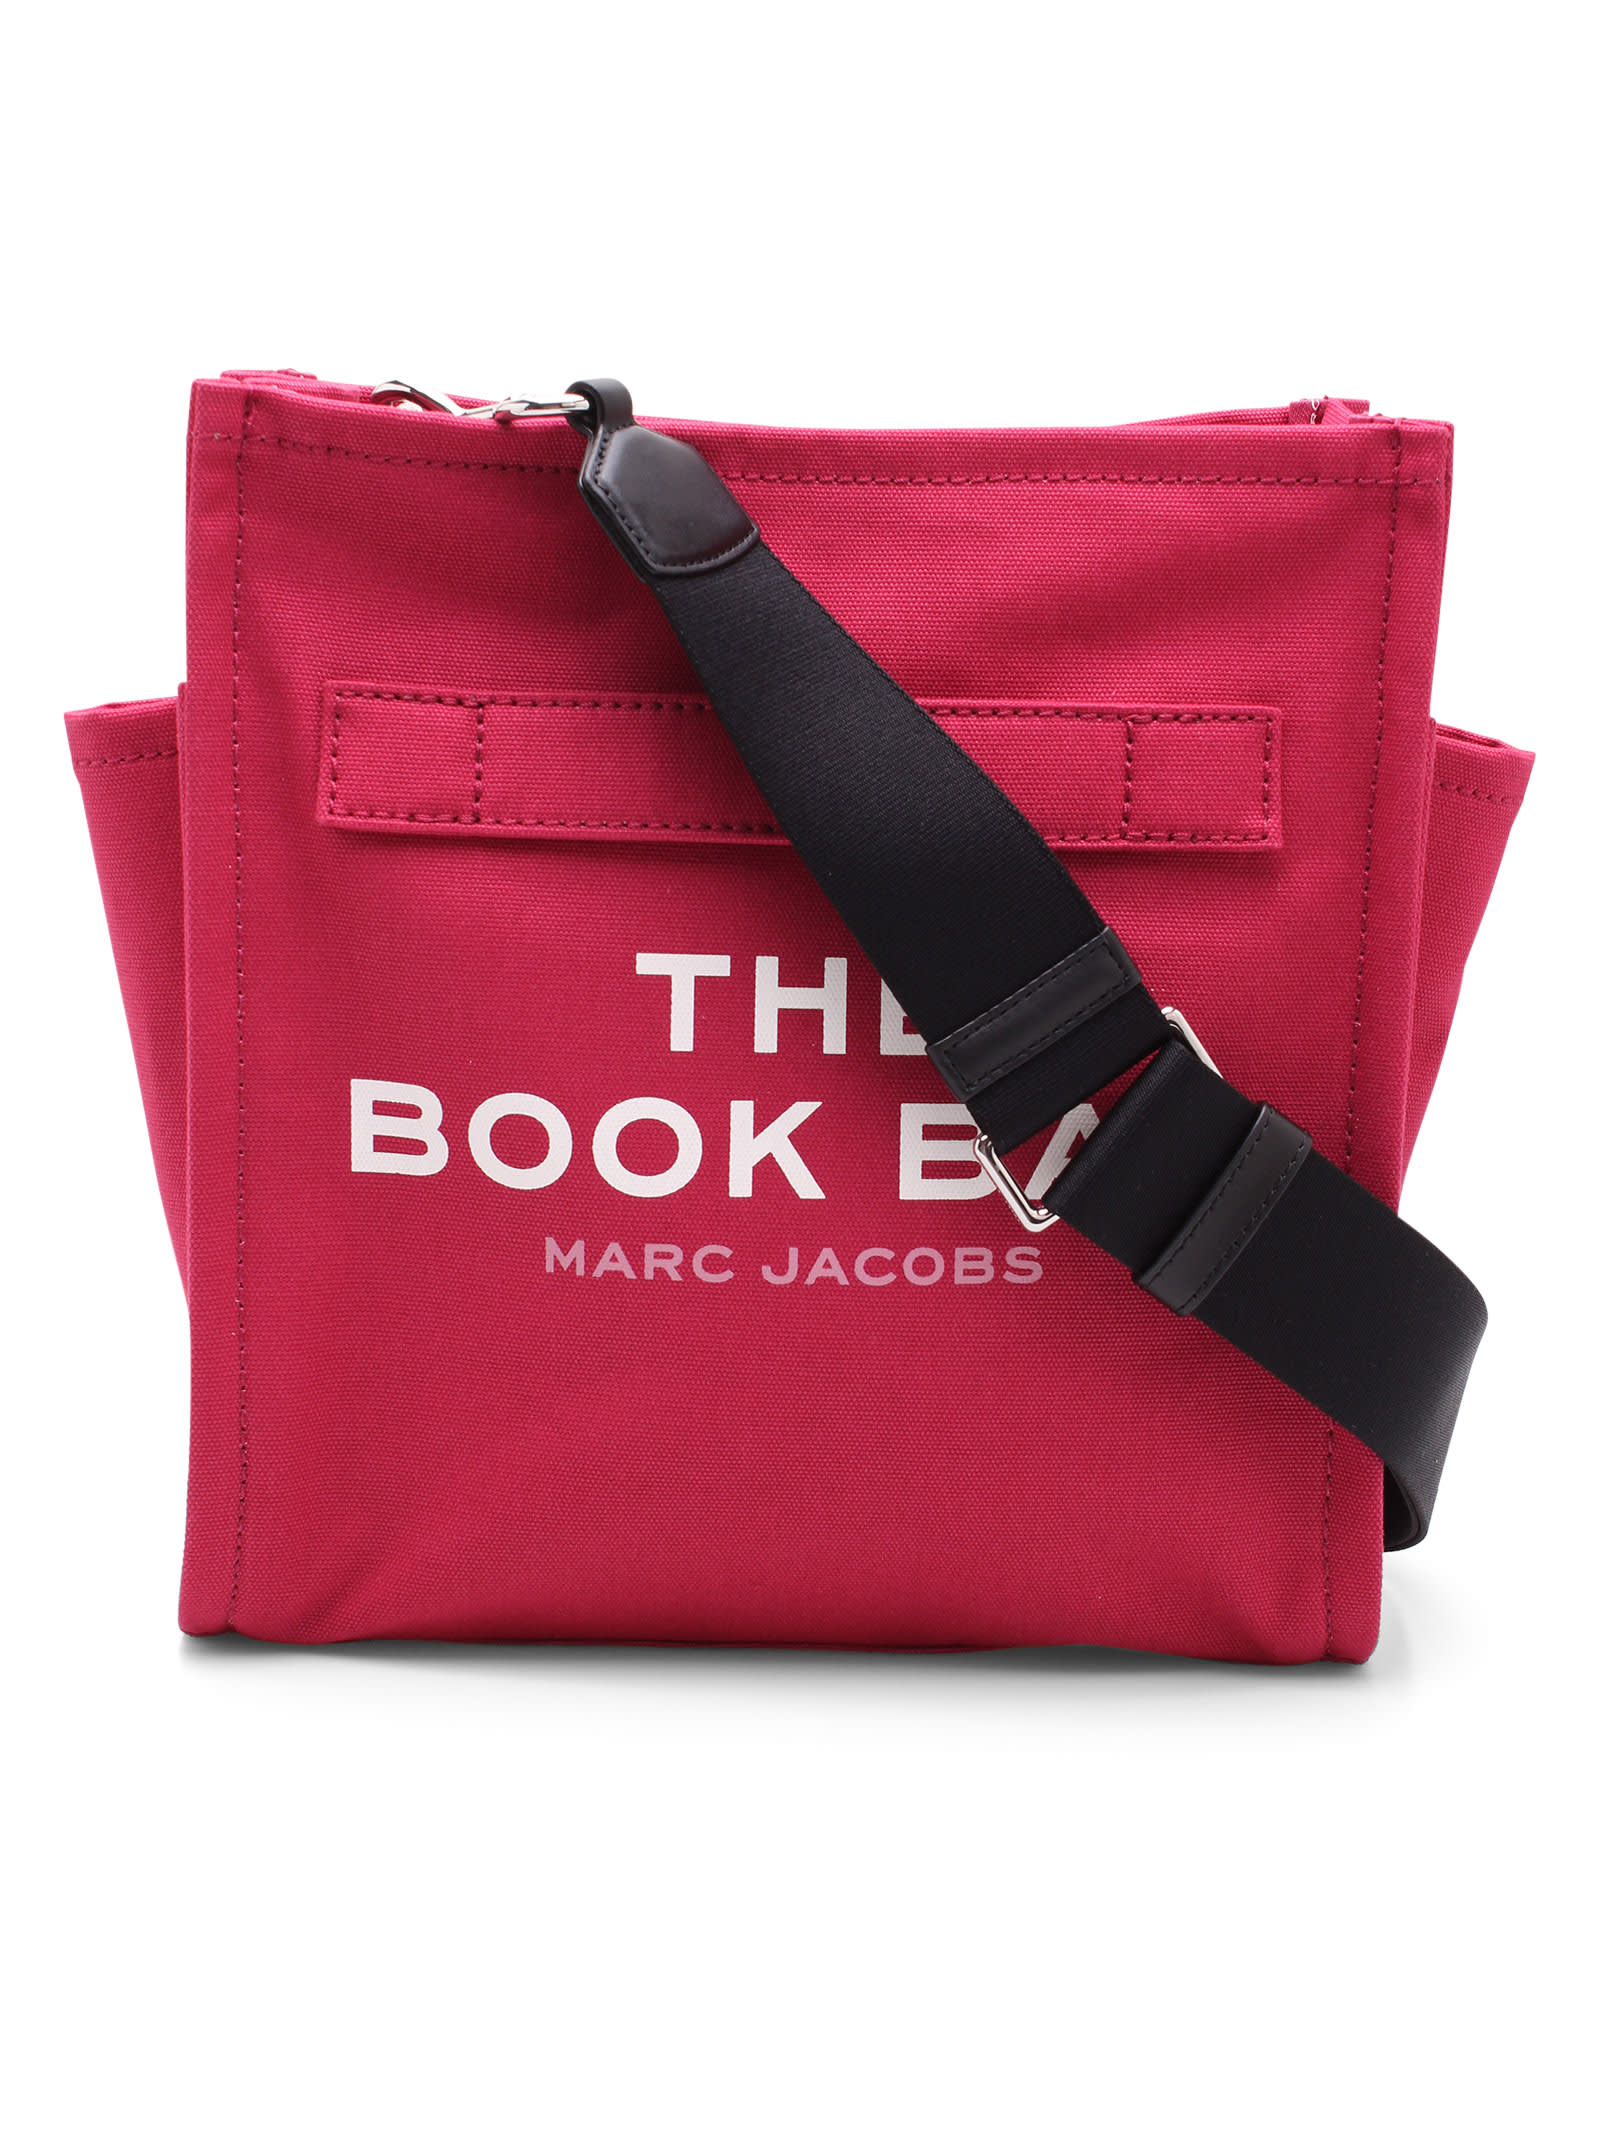 Marc Jacobs The Book Bag Cotton Shoulder Bag In Persian Red